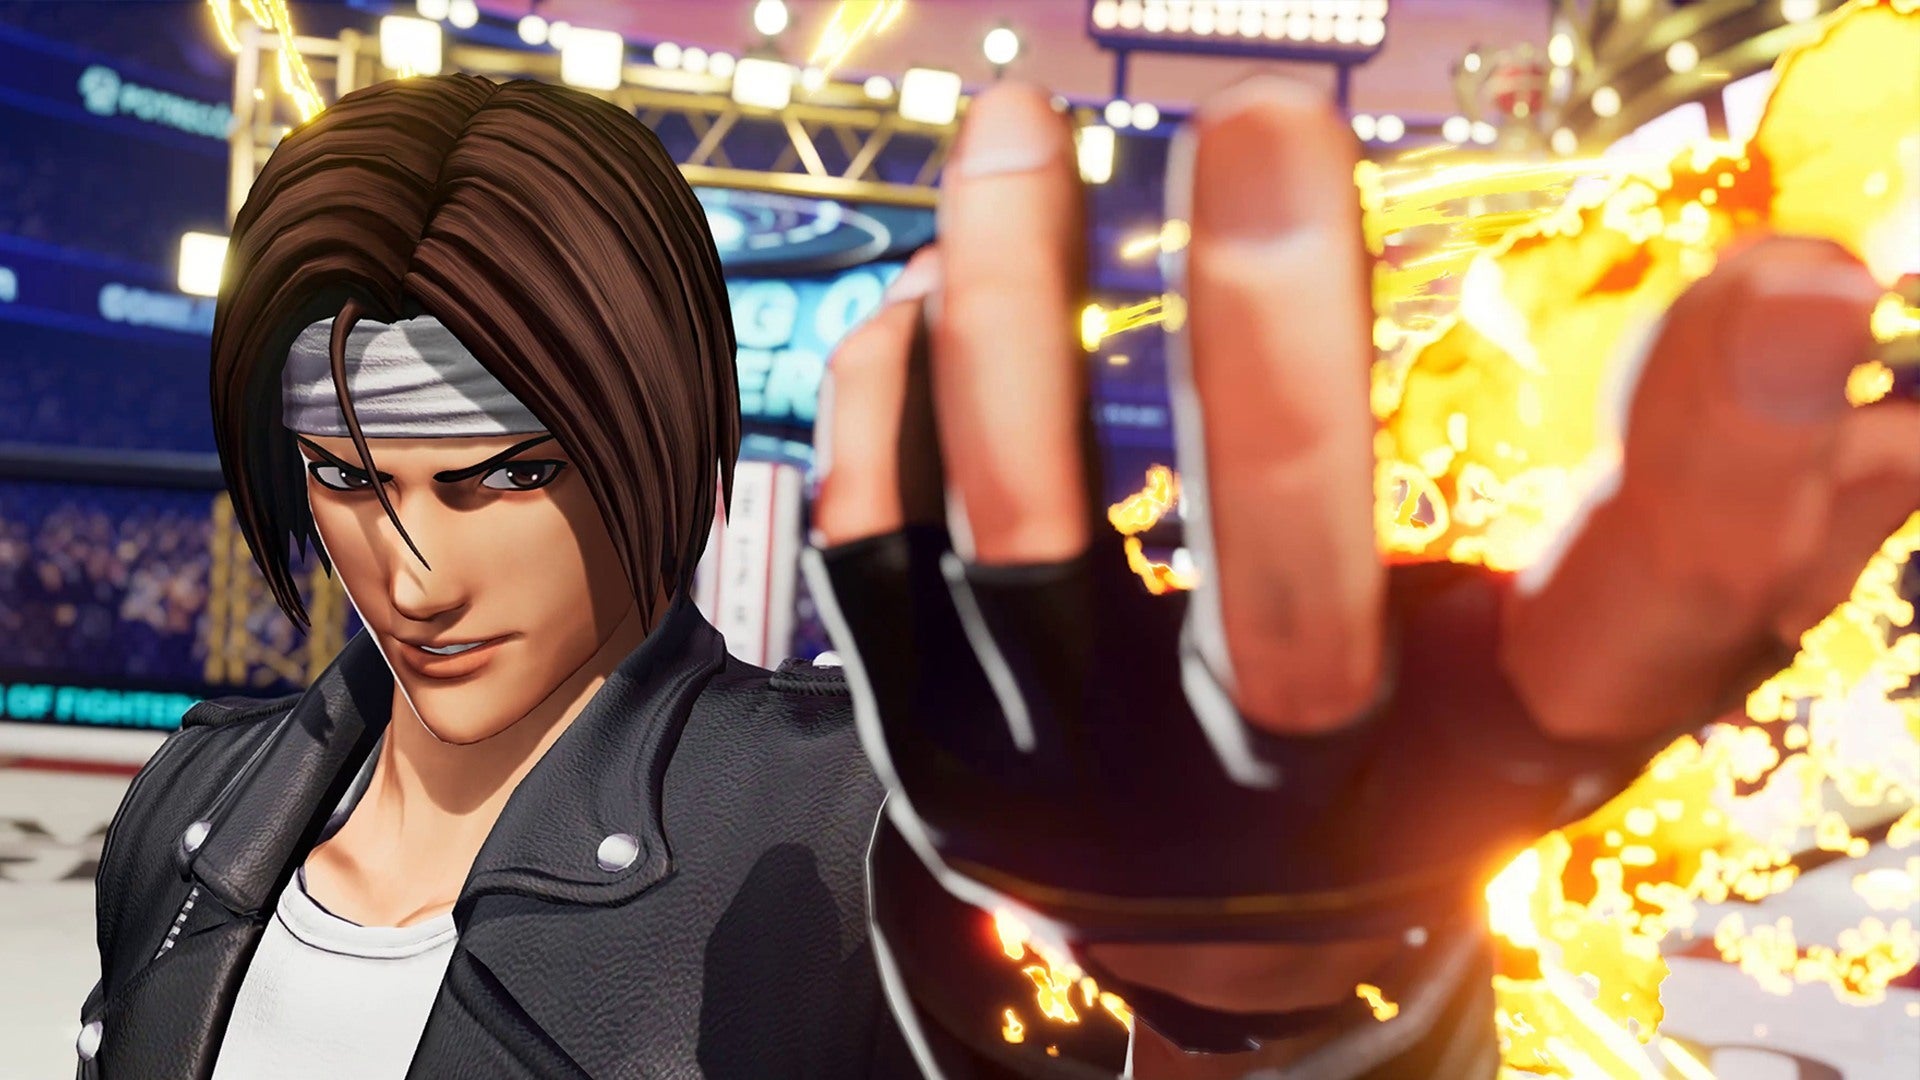 King Of Fighters Characters Kyo